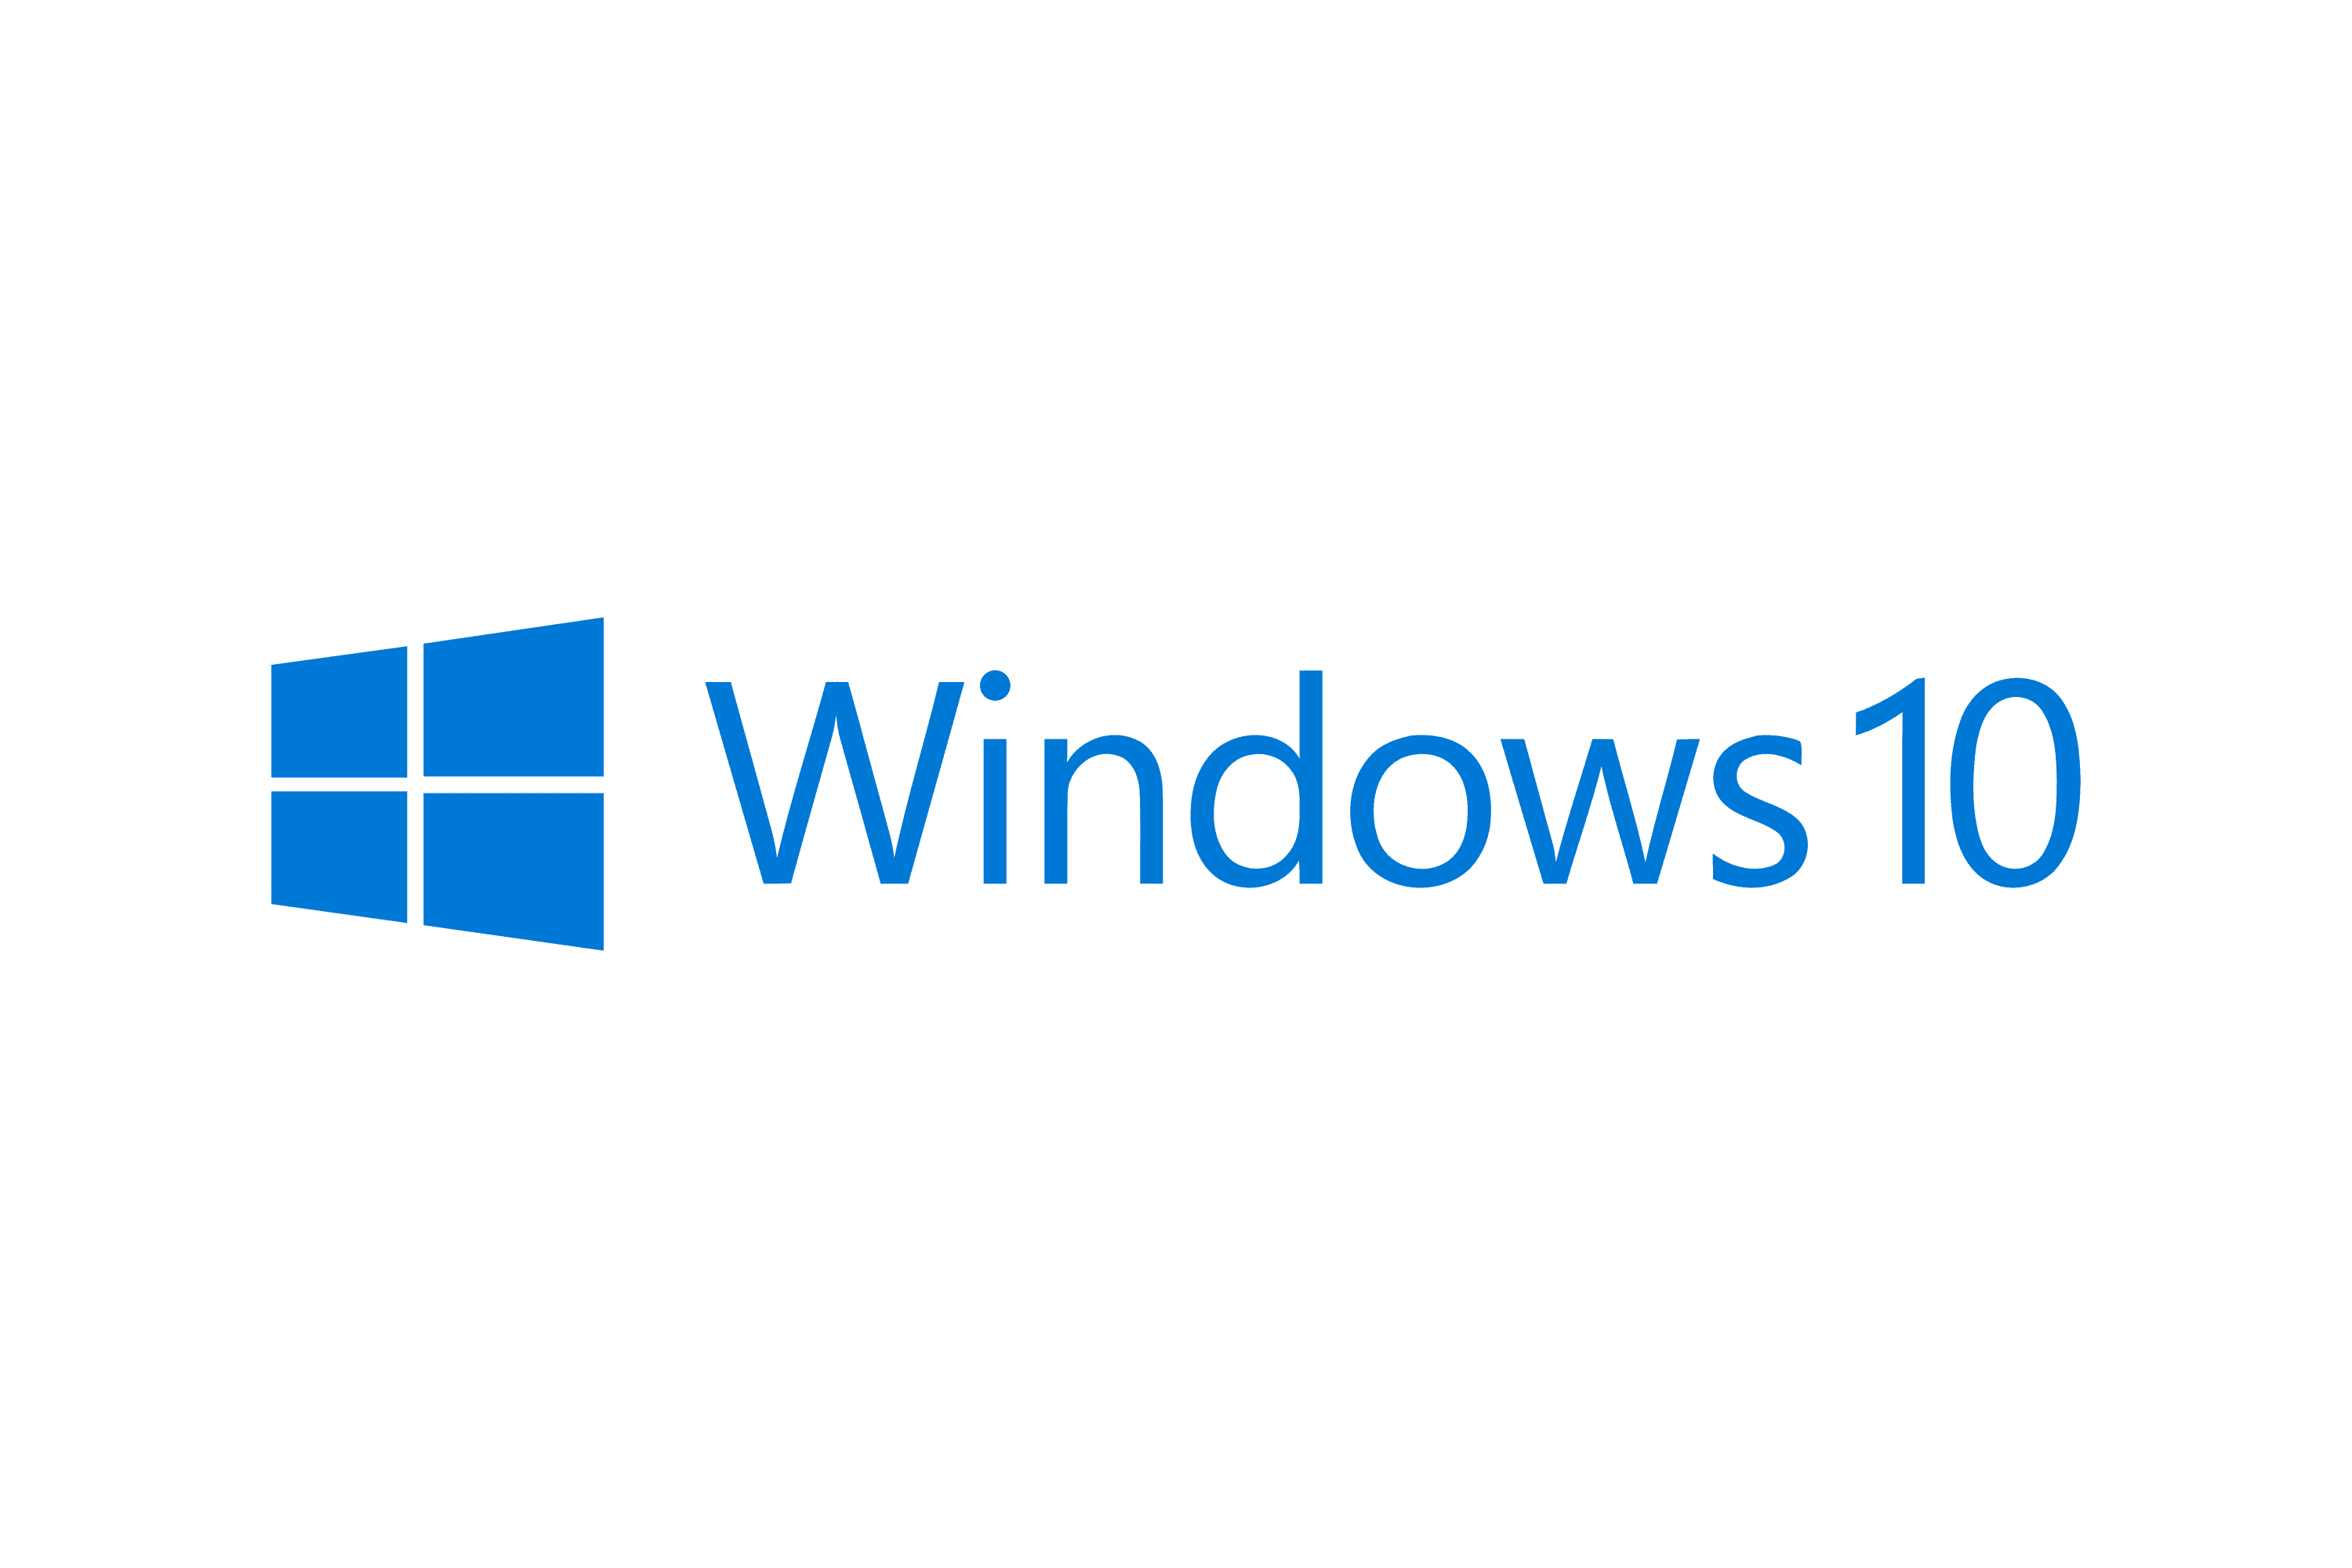 Optional Windows 10 KB5020030 preview release is now available